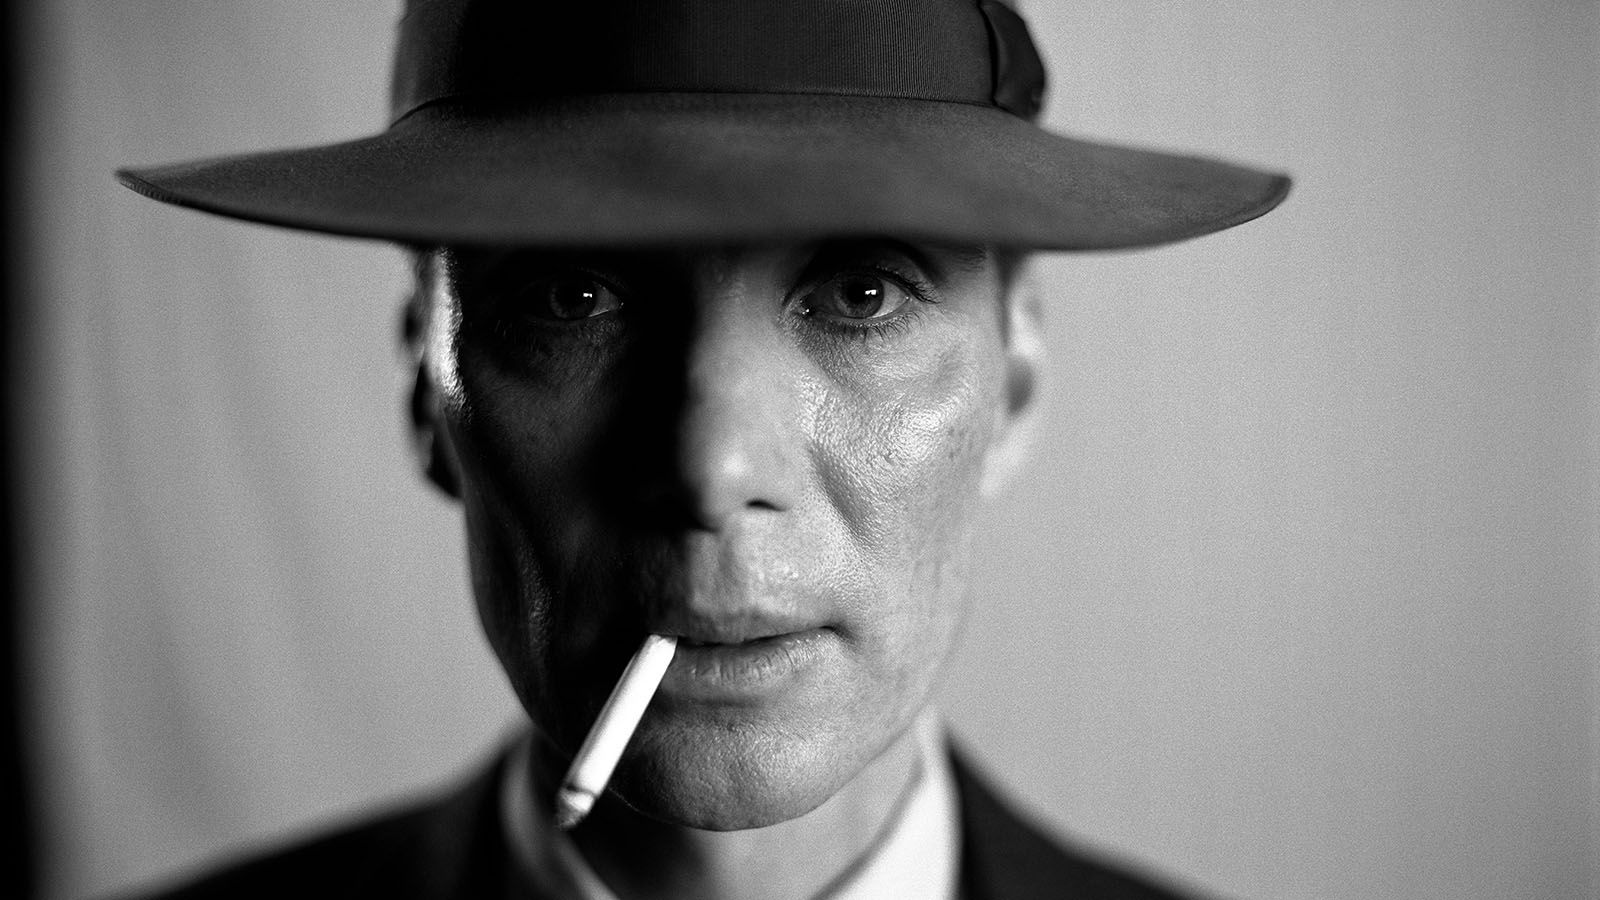 Cillian Murphy delievered an outstanding performance in the film Oppenheimer.